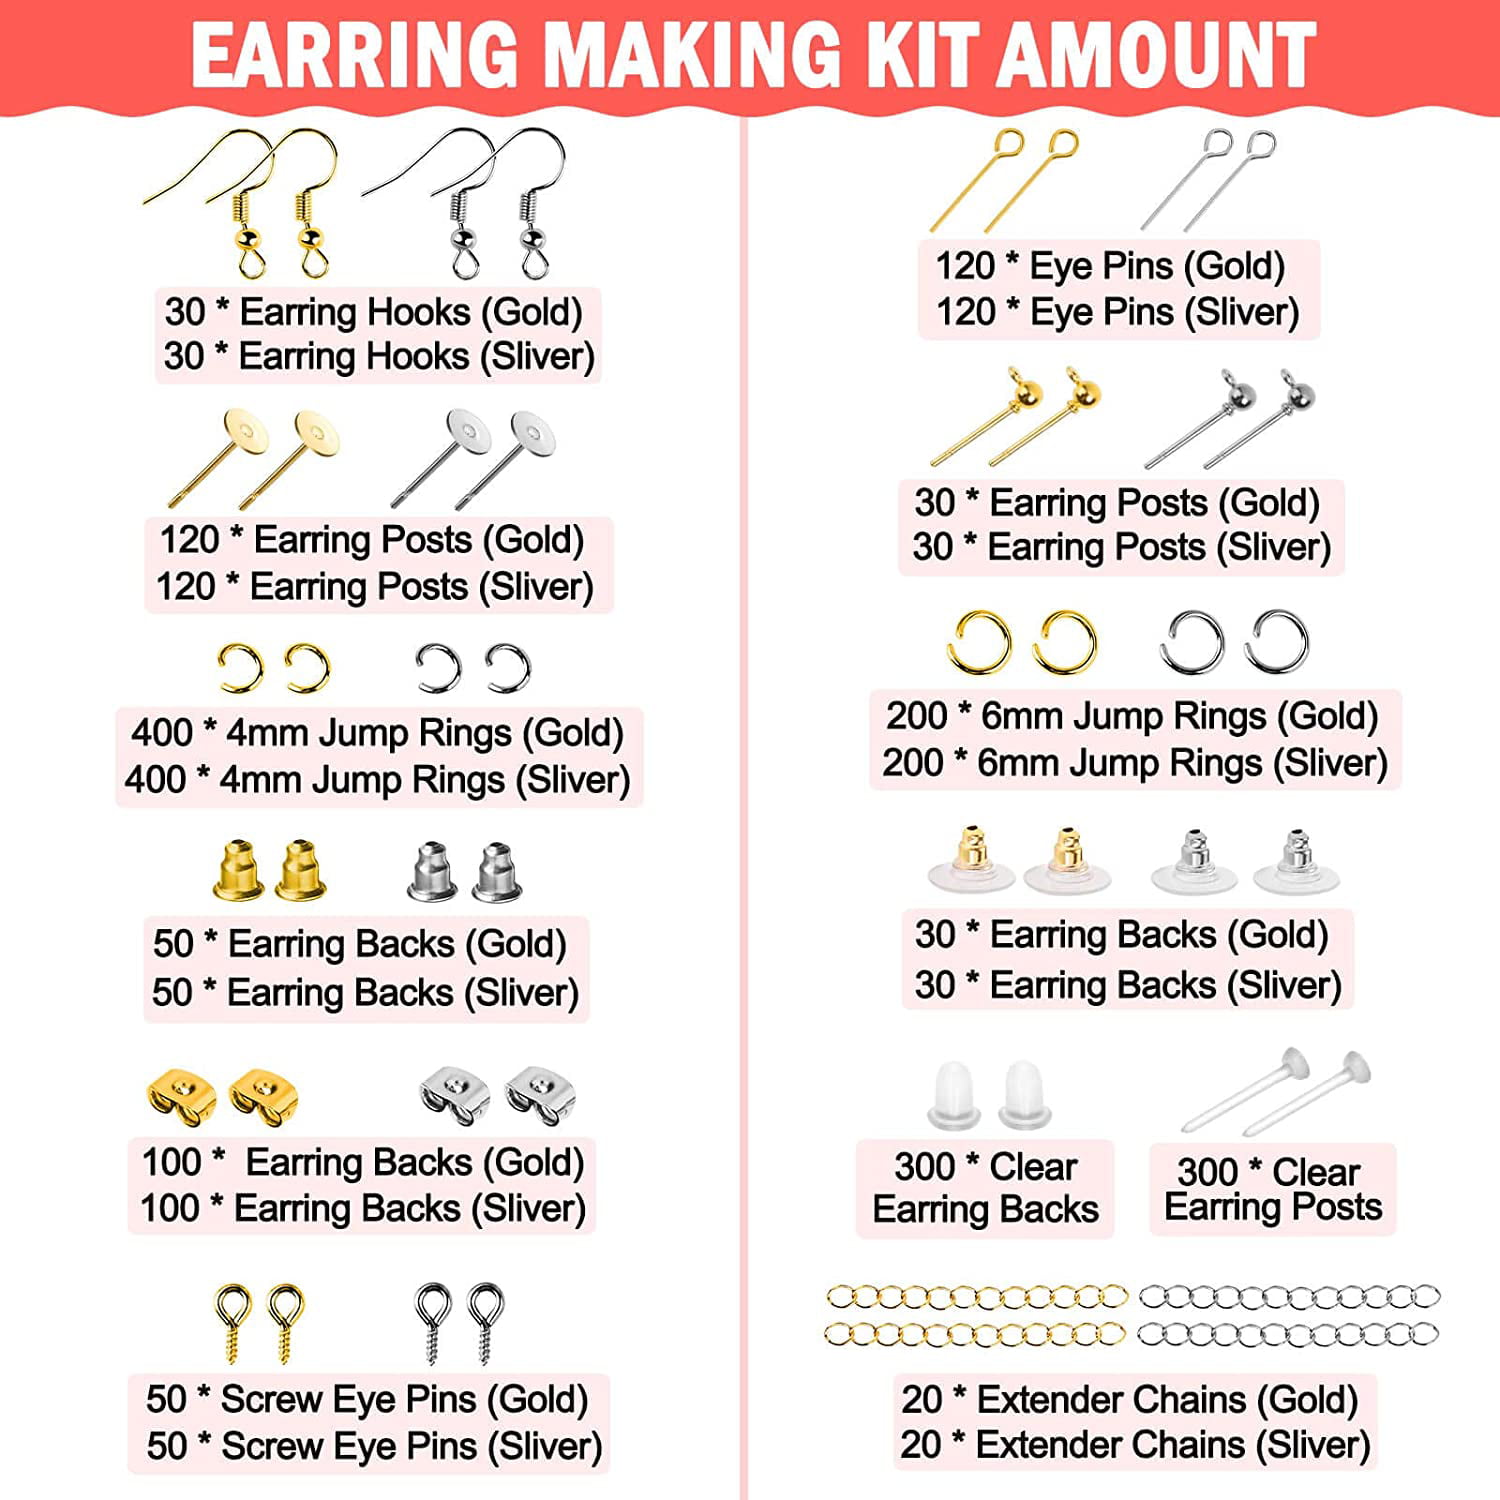 Earring Making Kit, 2290Pcs Earring Making Supplies Kit with Earring Hooks,  Earring Findings, Earring Backs, Earring Posts, Jump Rings for Jewelry